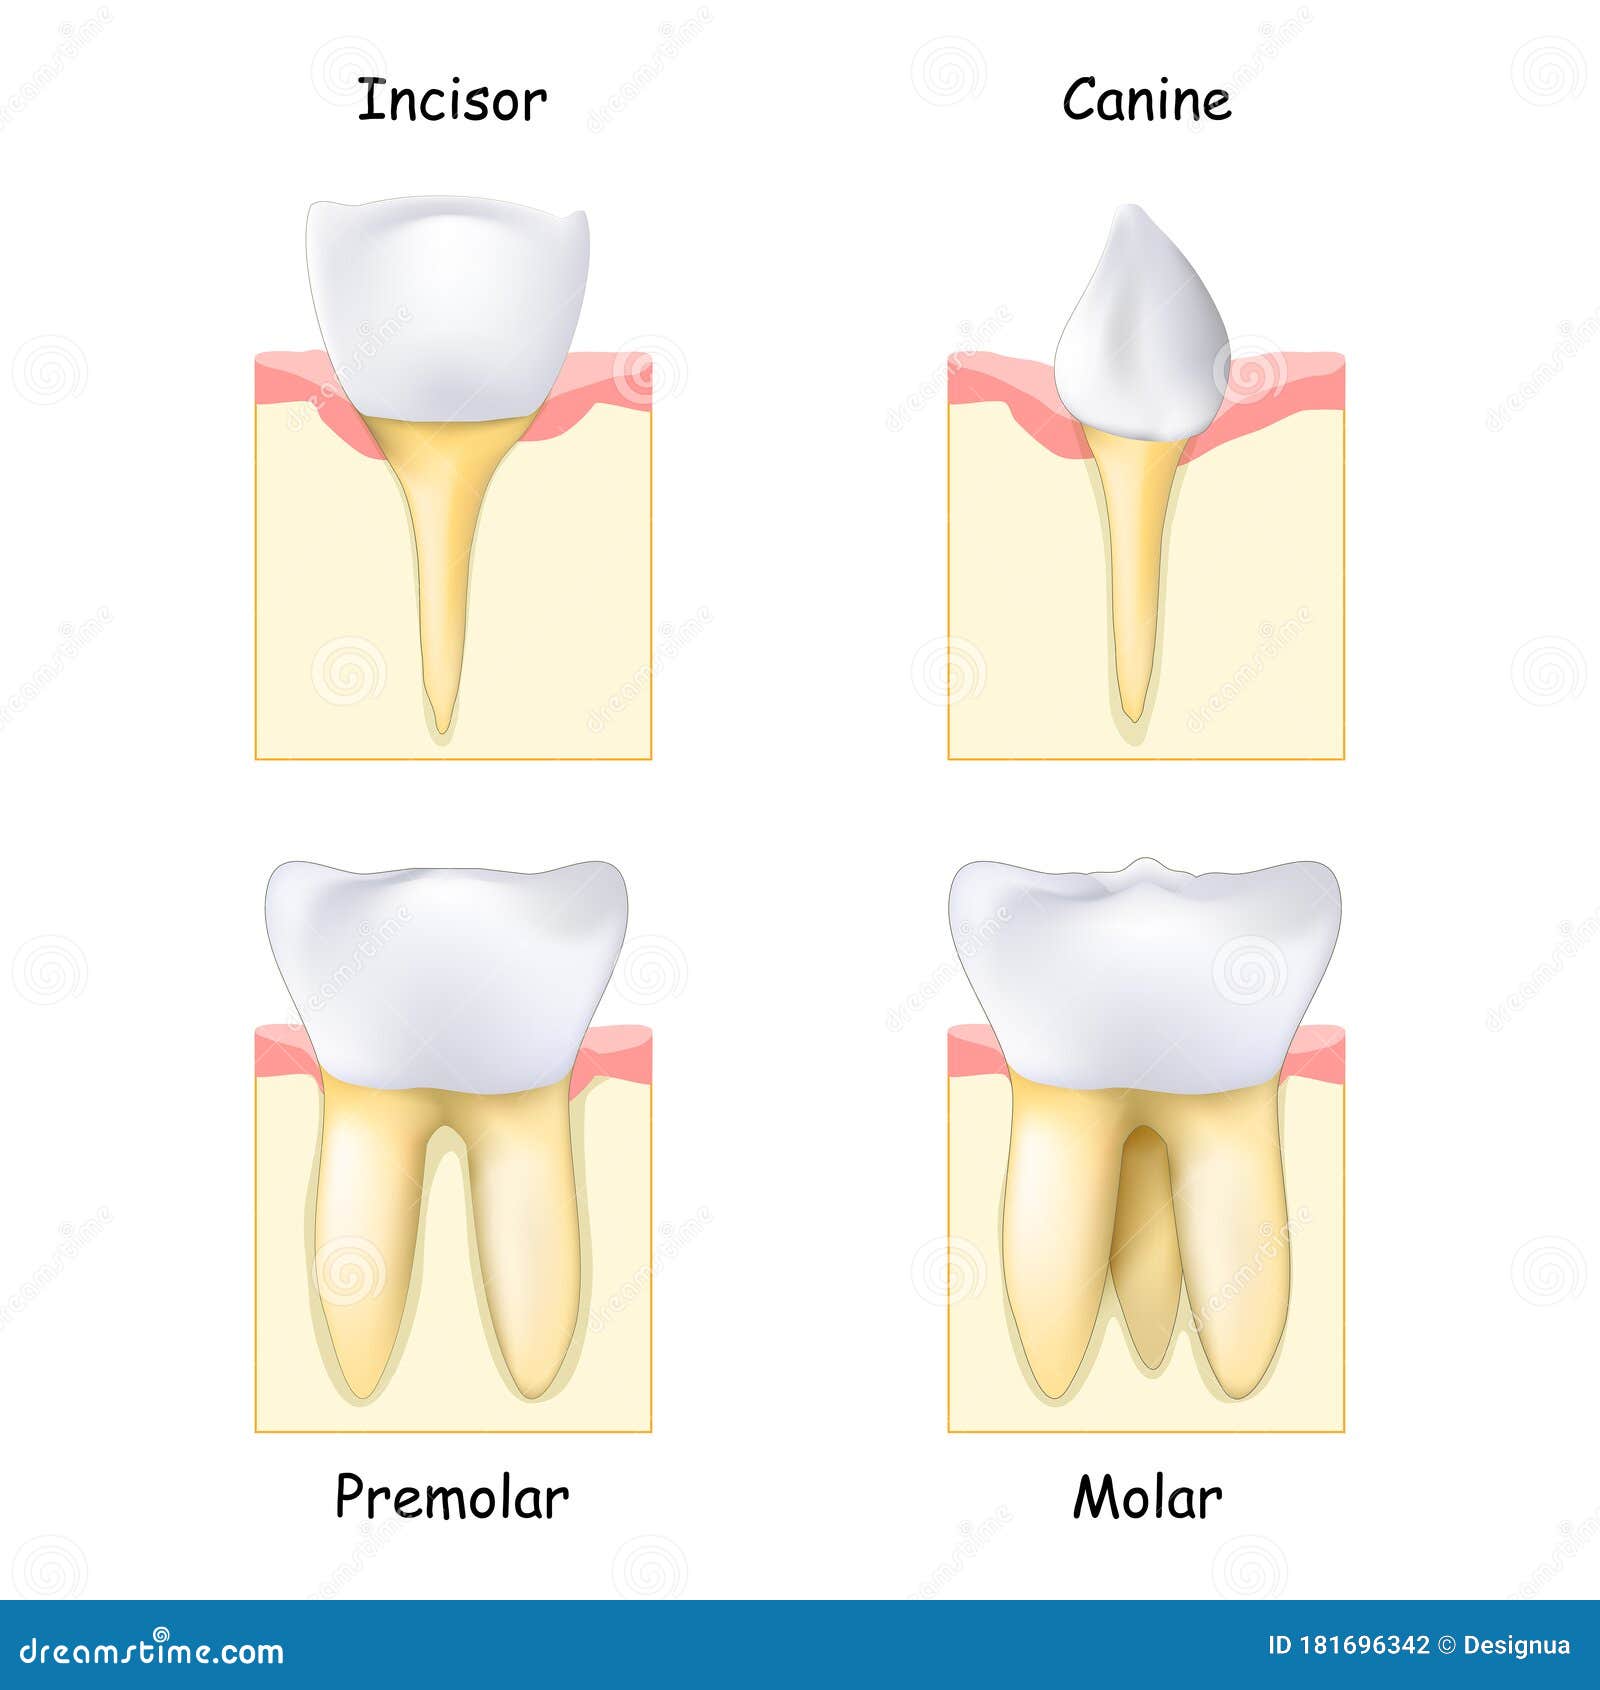 types of teeth: from canine and incisor to molar and premolar